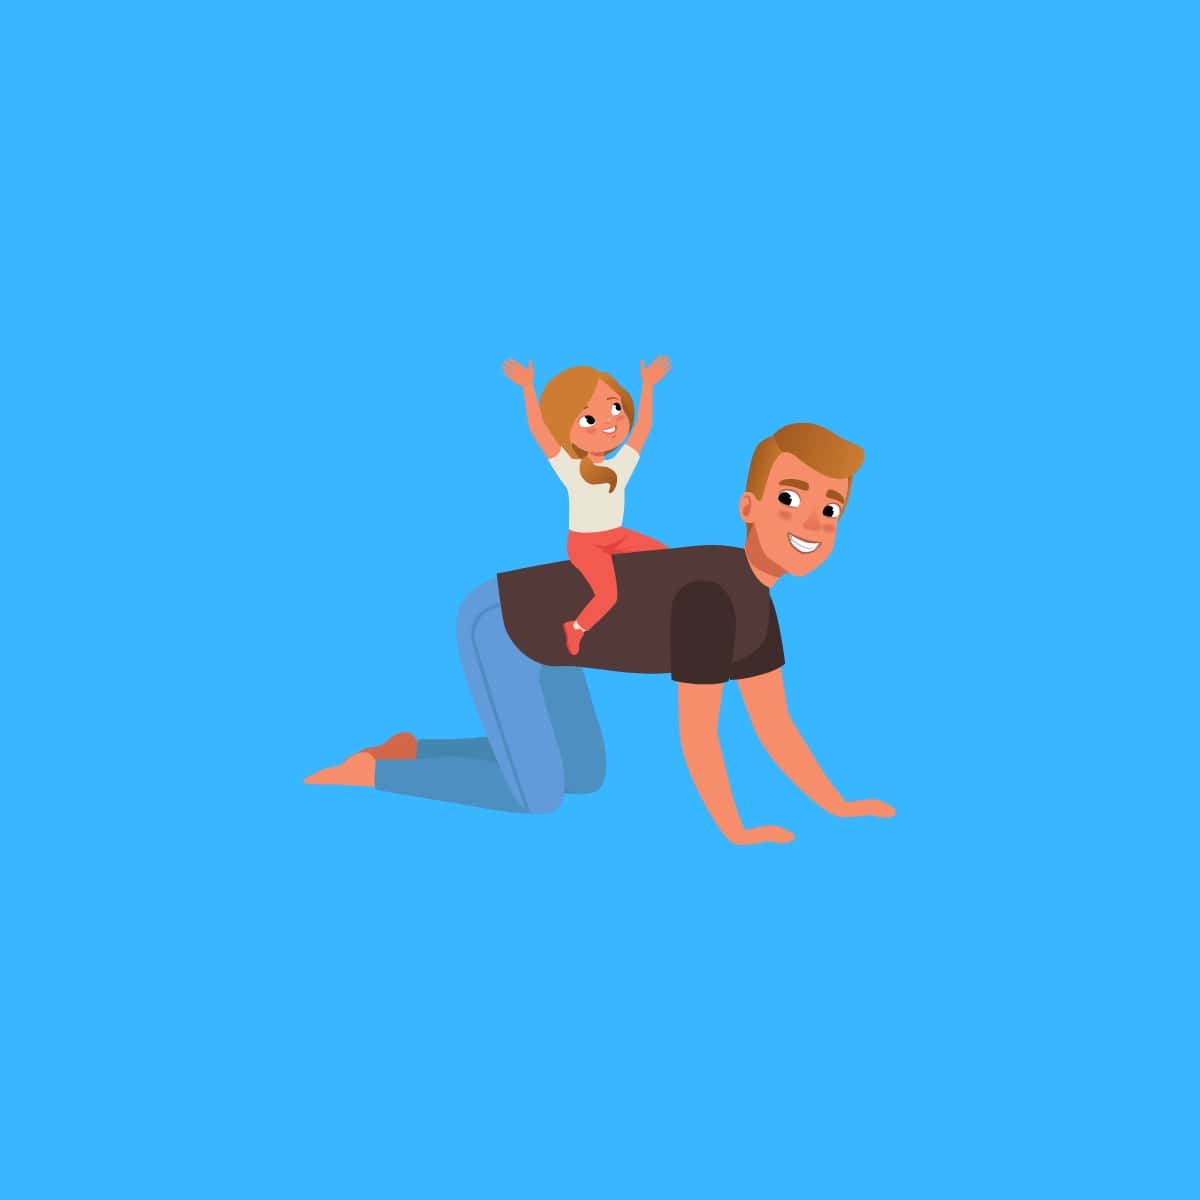 Cartoon graphic of an uncle giving his niece a horsey ride on a blue background.